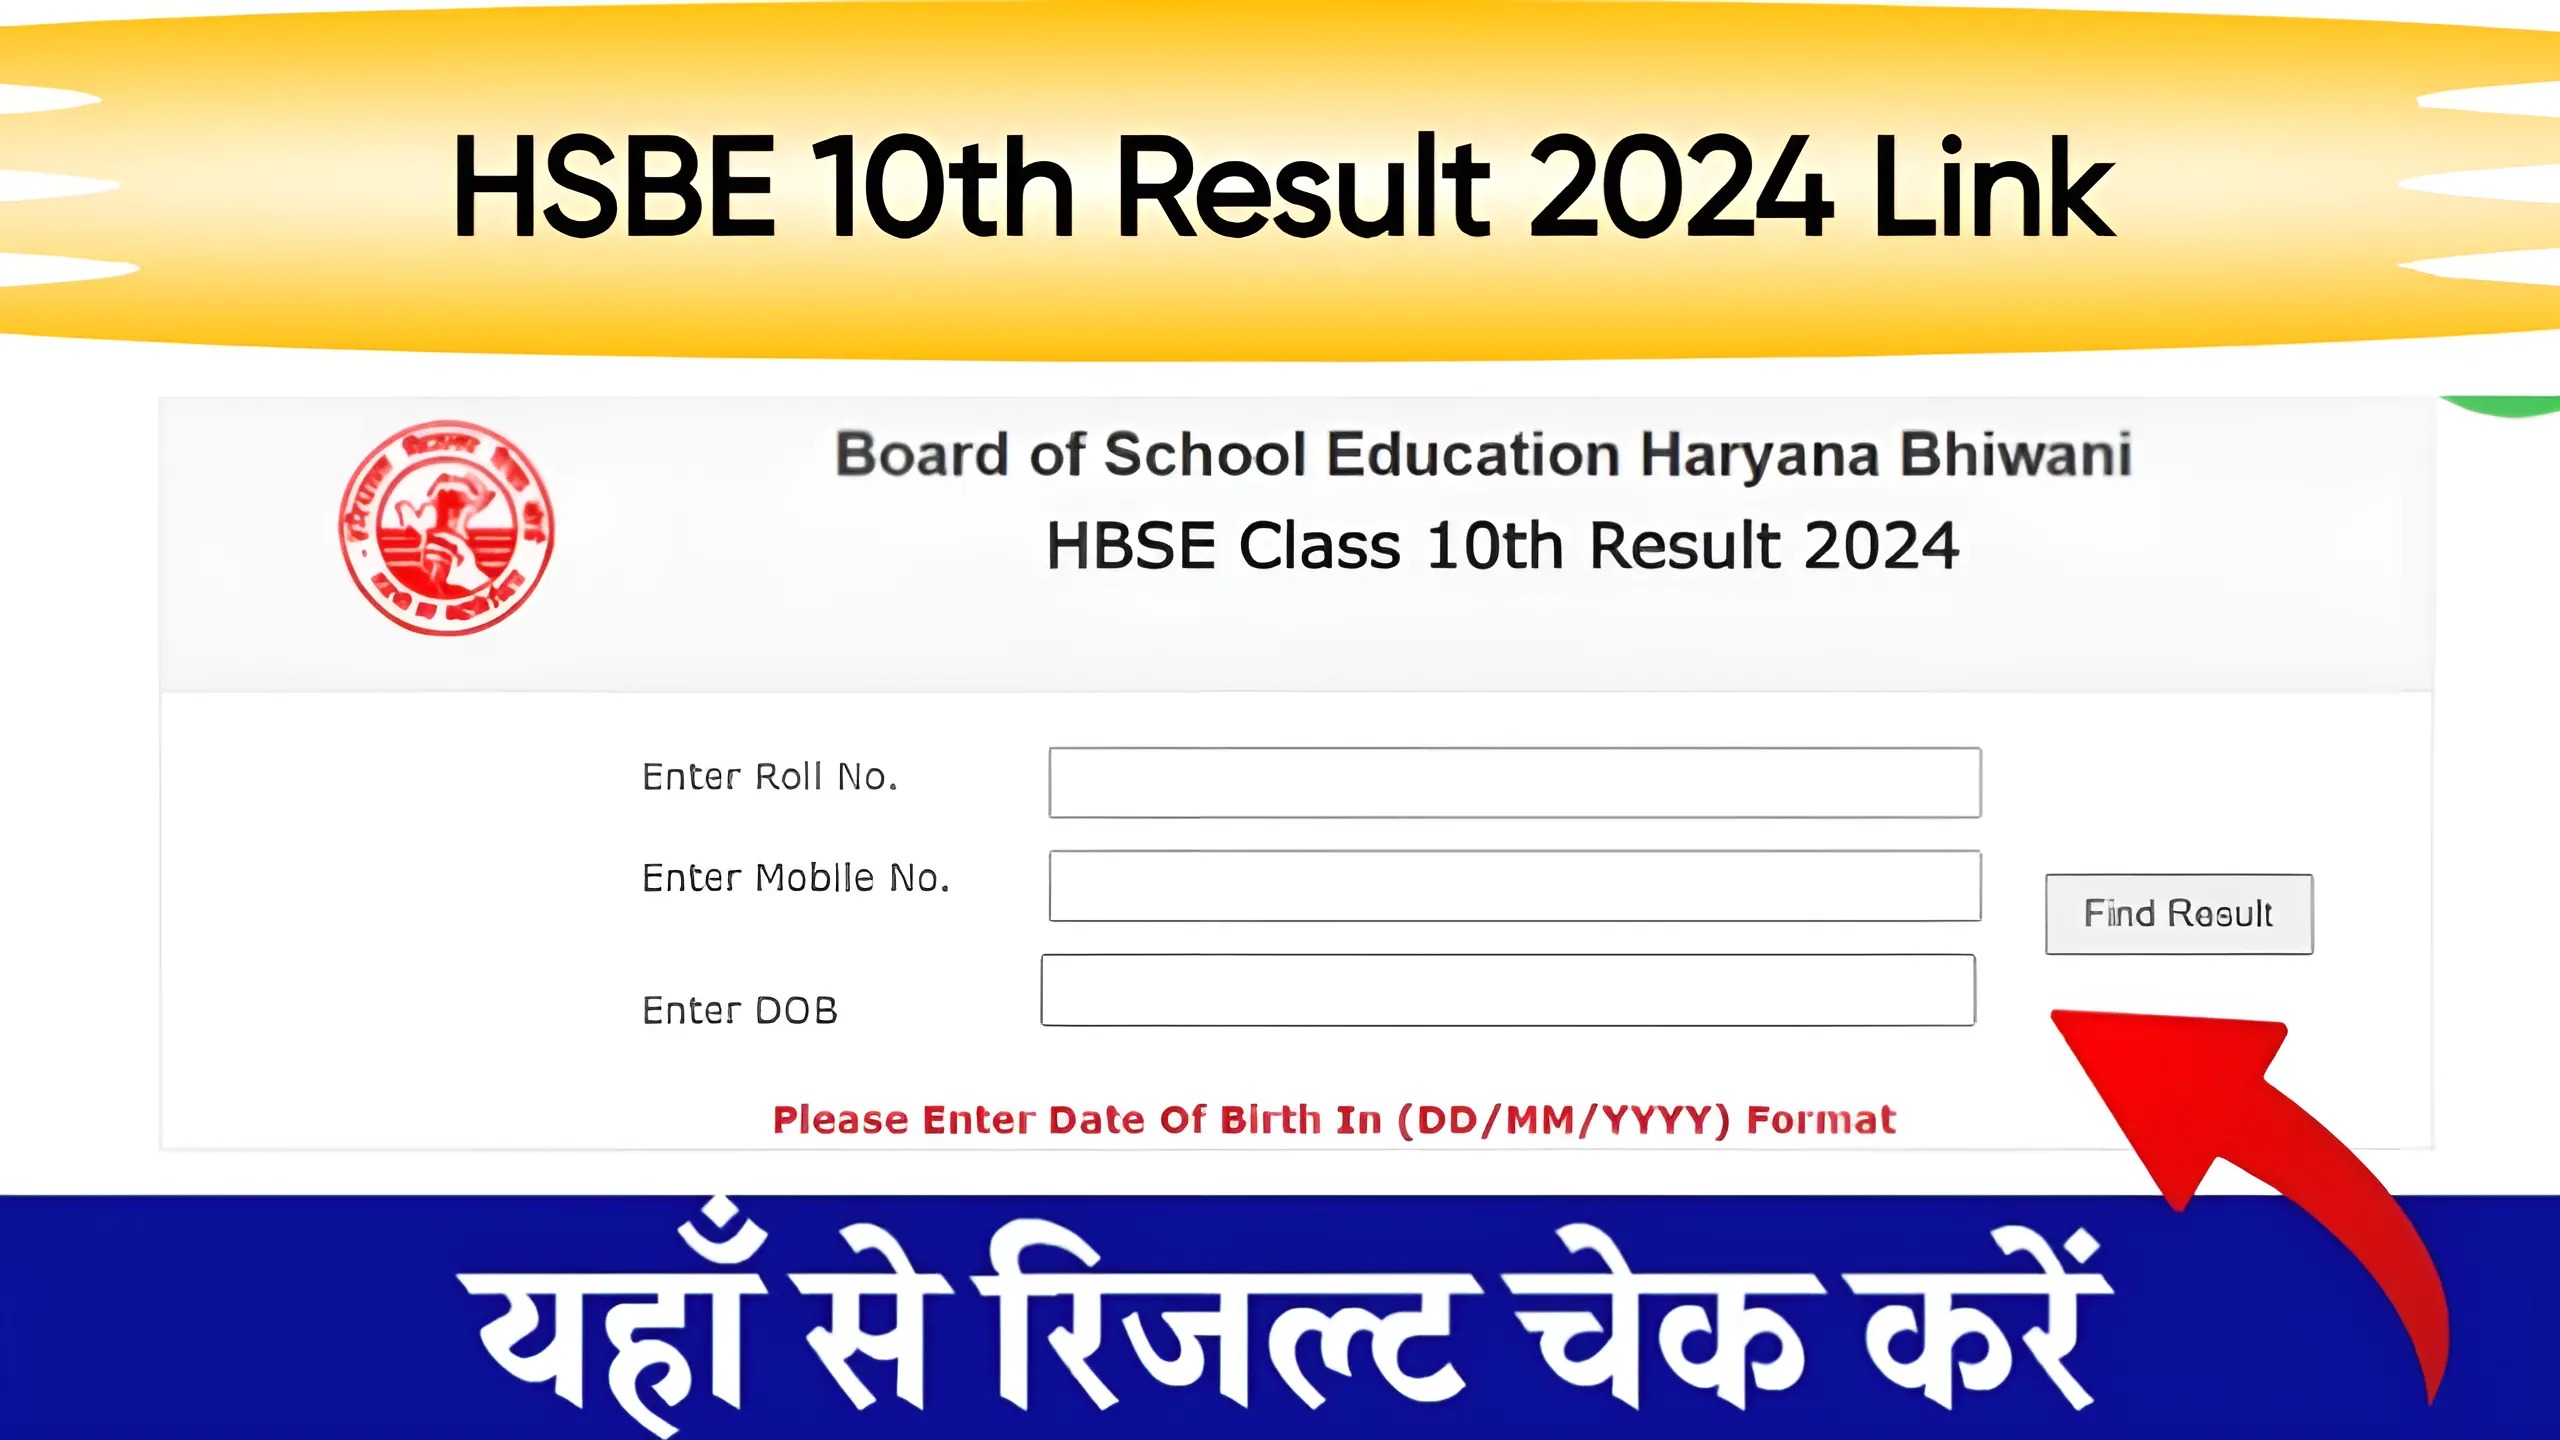 HBSE 10th Class Result 2024 Link